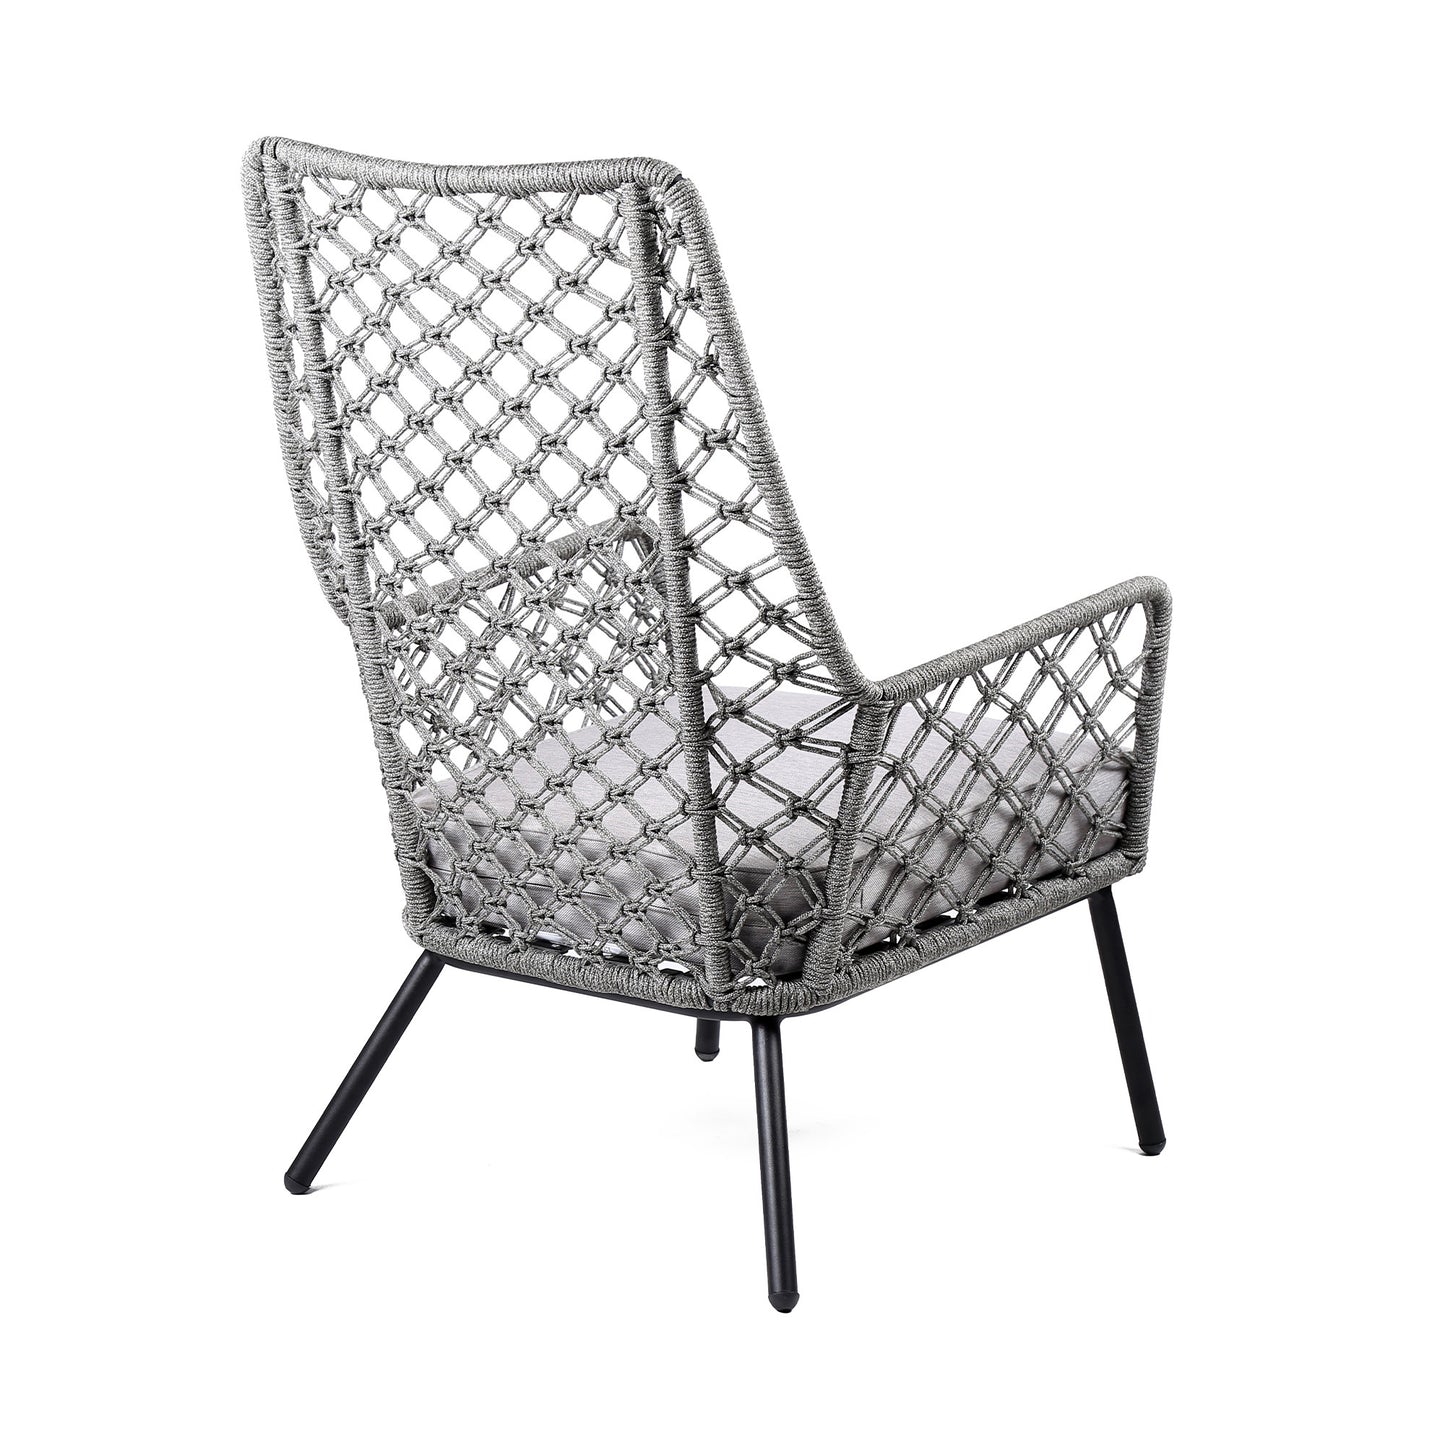 26" Gray and Black Steel Indoor Outdoor Dining Chair with Gray Cushion